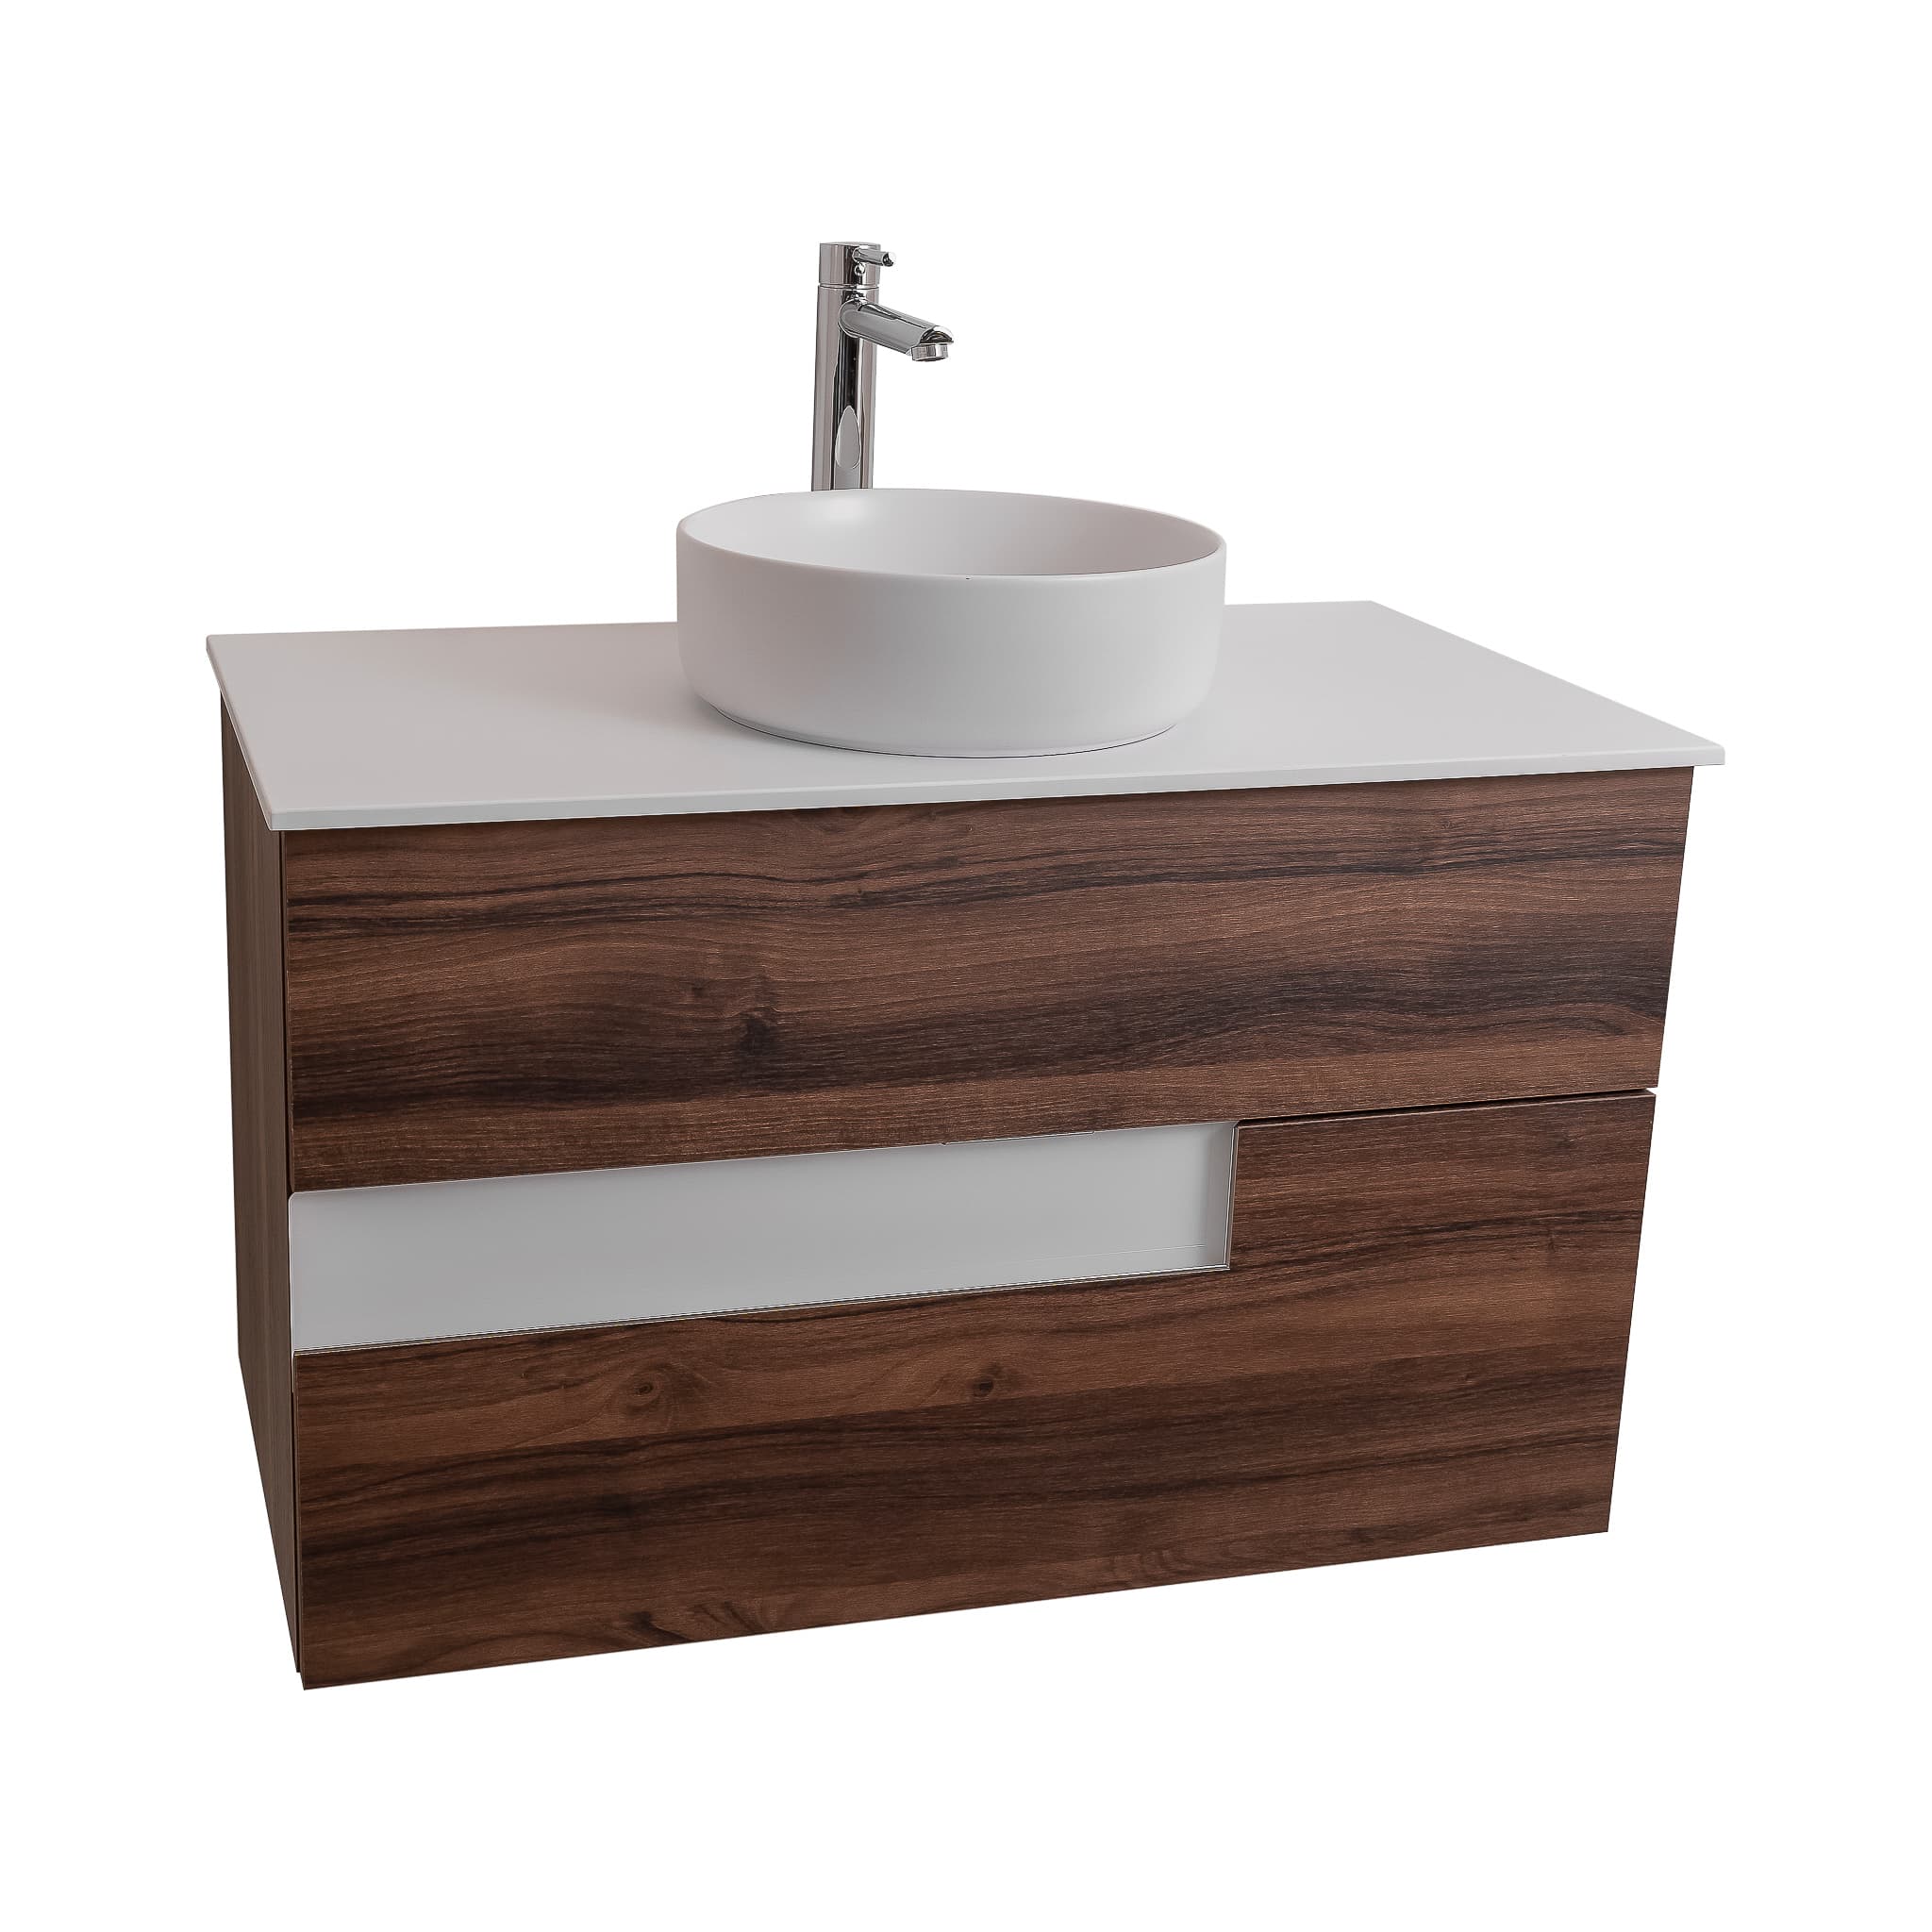 Vision 31.5 Valenti Medium Brown Wood Cabinet, Ares White Top And Ares White Ceramic Basin, Wall Mounted Modern Vanity Set